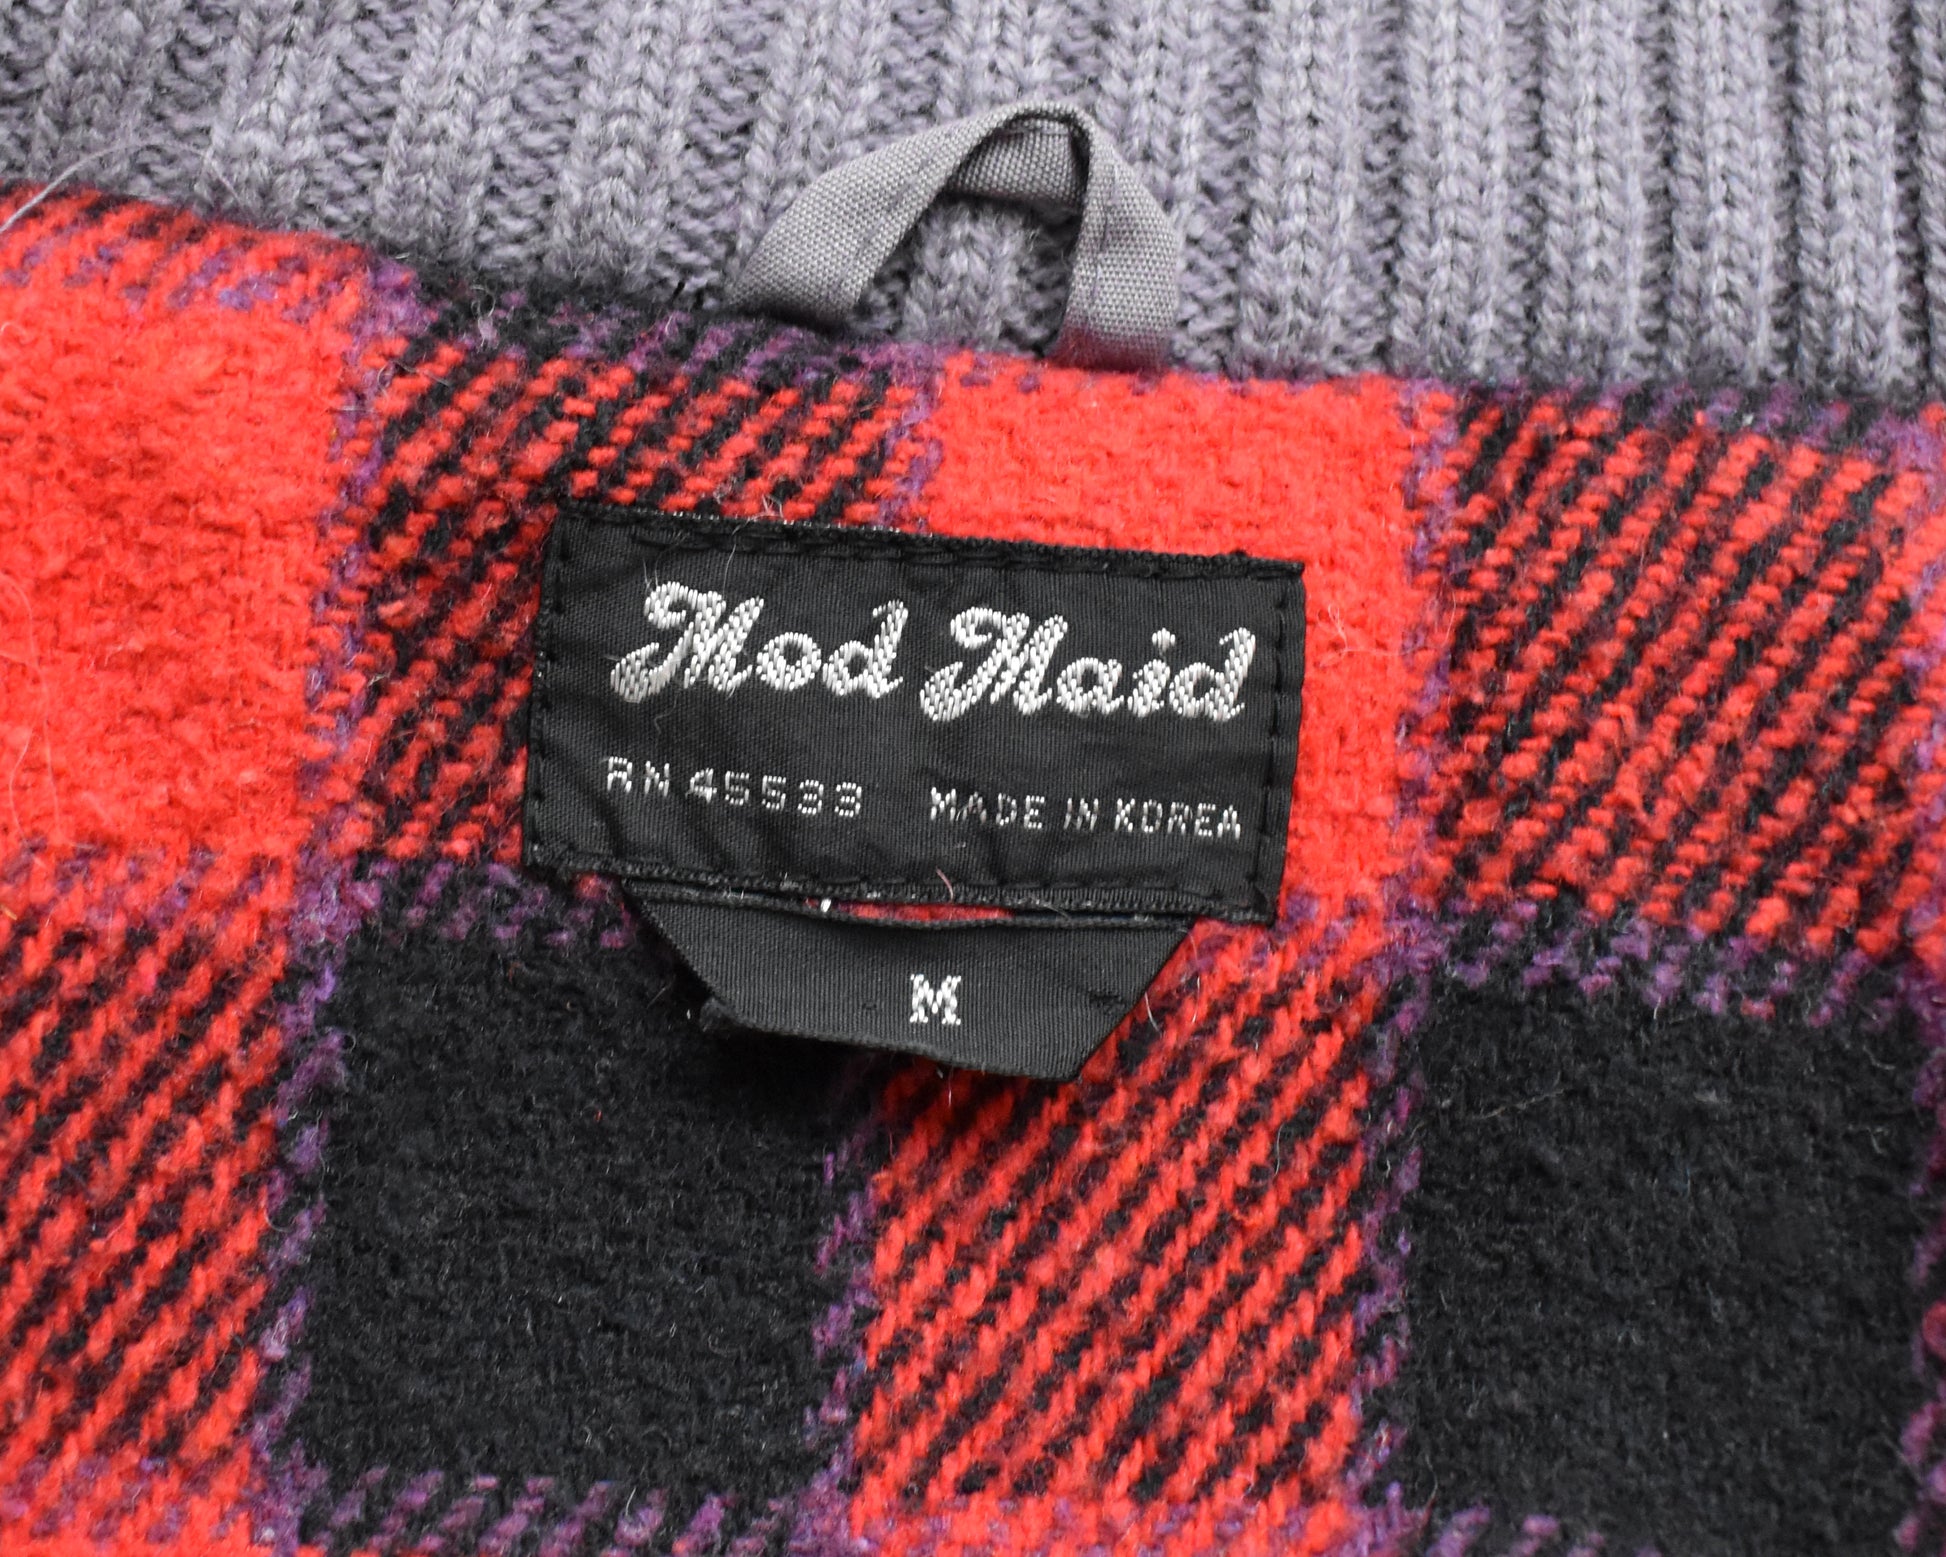 Close up of the tag that says Mod Maid